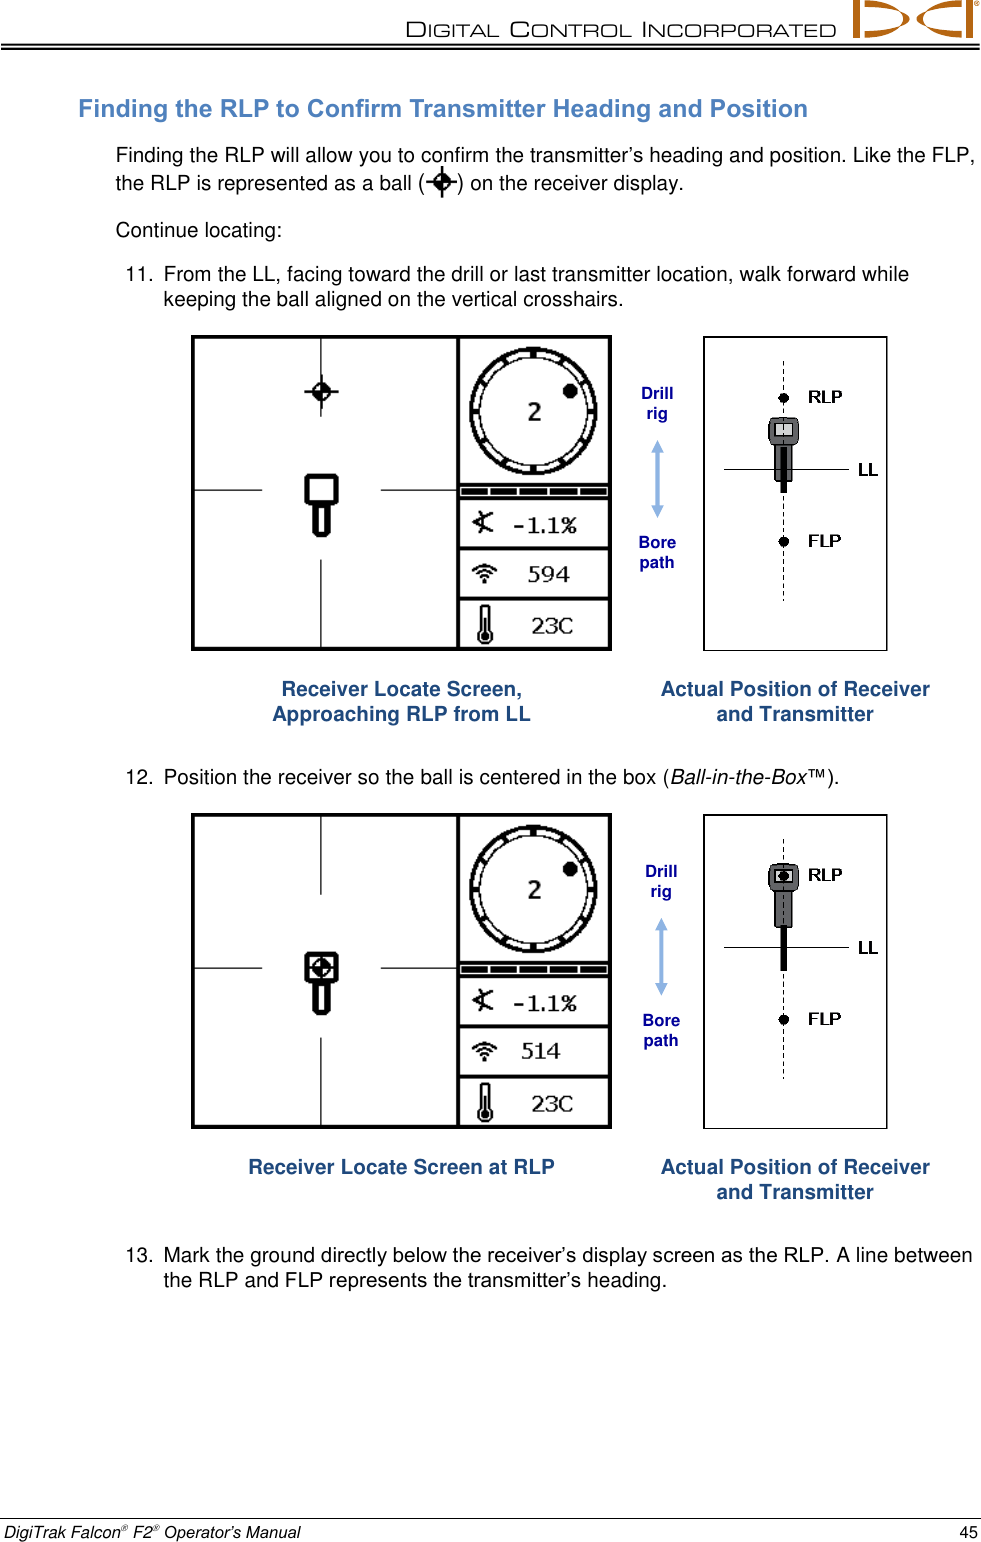 DIGITAL  CONTROL  INCORPORATED  DigiTrak Falcon F2 Operator’s Manual 45 Finding the RLP to Confirm Transmitter Heading and Position Finding the RLP will allow you to confirm the transmitter’s heading and position. Like the FLP, the RLP is represented as a ball ( ) on the receiver display. Continue locating: 11.  From the LL, facing toward the drill or last transmitter location, walk forward while keeping the ball aligned on the vertical crosshairs.  Receiver Locate Screen,  Approaching RLP from LL  Actual Position of Receiver and Transmitter 12.  Position the receiver so the ball is centered in the box (Ball-in-the-Box™).  Receiver Locate Screen at RLP  Actual Position of Receiver and Transmitter 13.  Mark the ground directly below the receiver’s display screen as the RLP. A line between the RLP and FLP represents the transmitter’s heading. Drill rig Bore path Drill rig Bore path 